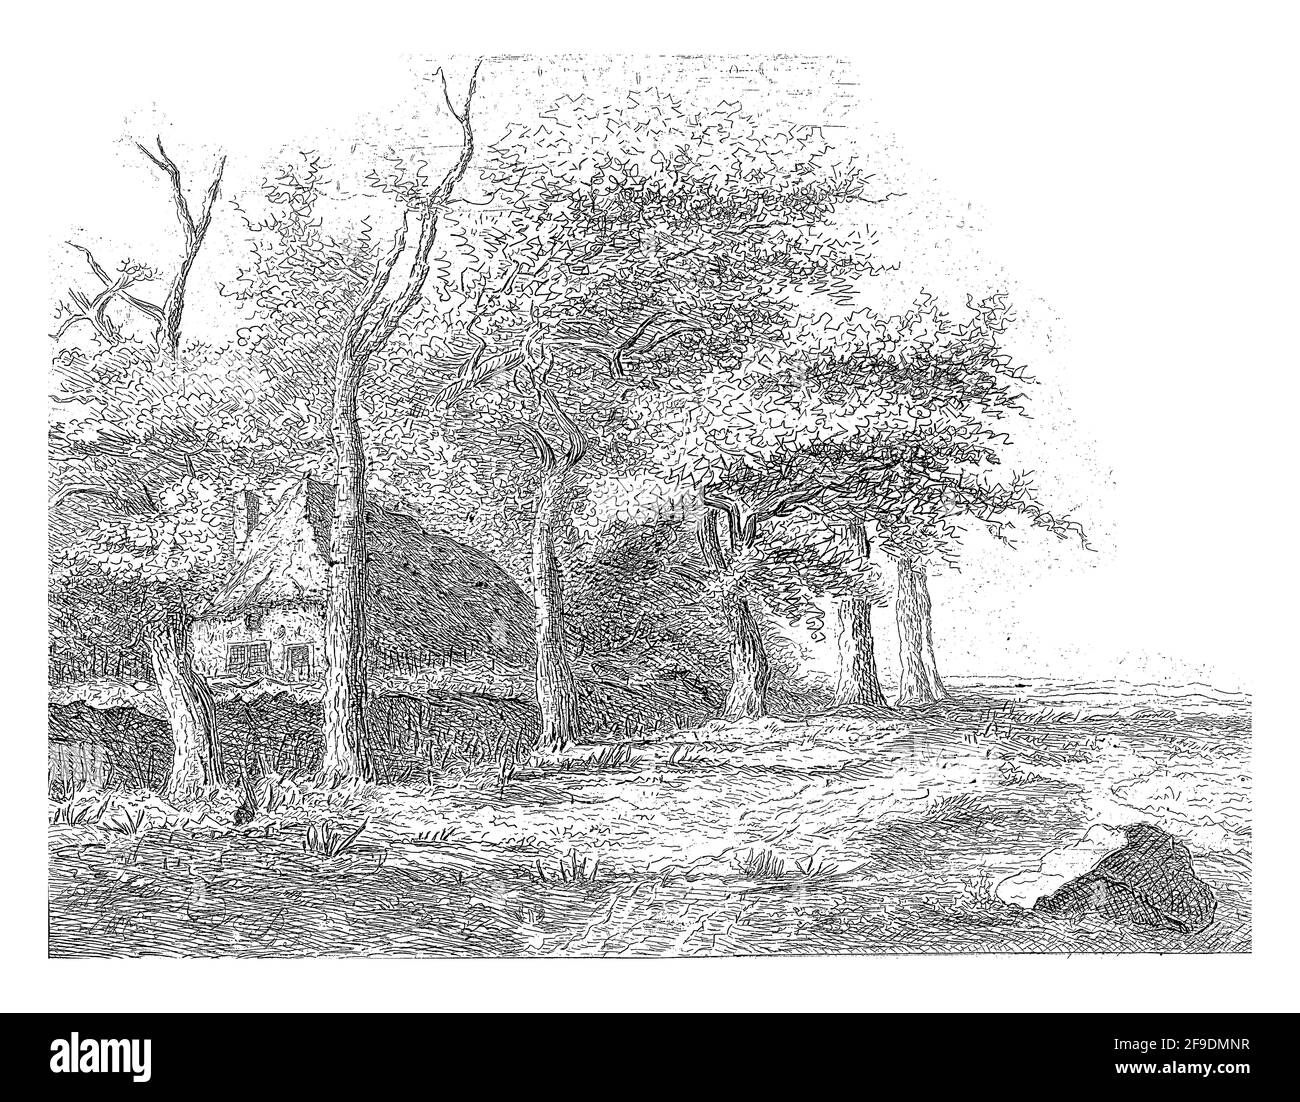 A row of trees along a bank. Behind the shore a house. Stock Photo